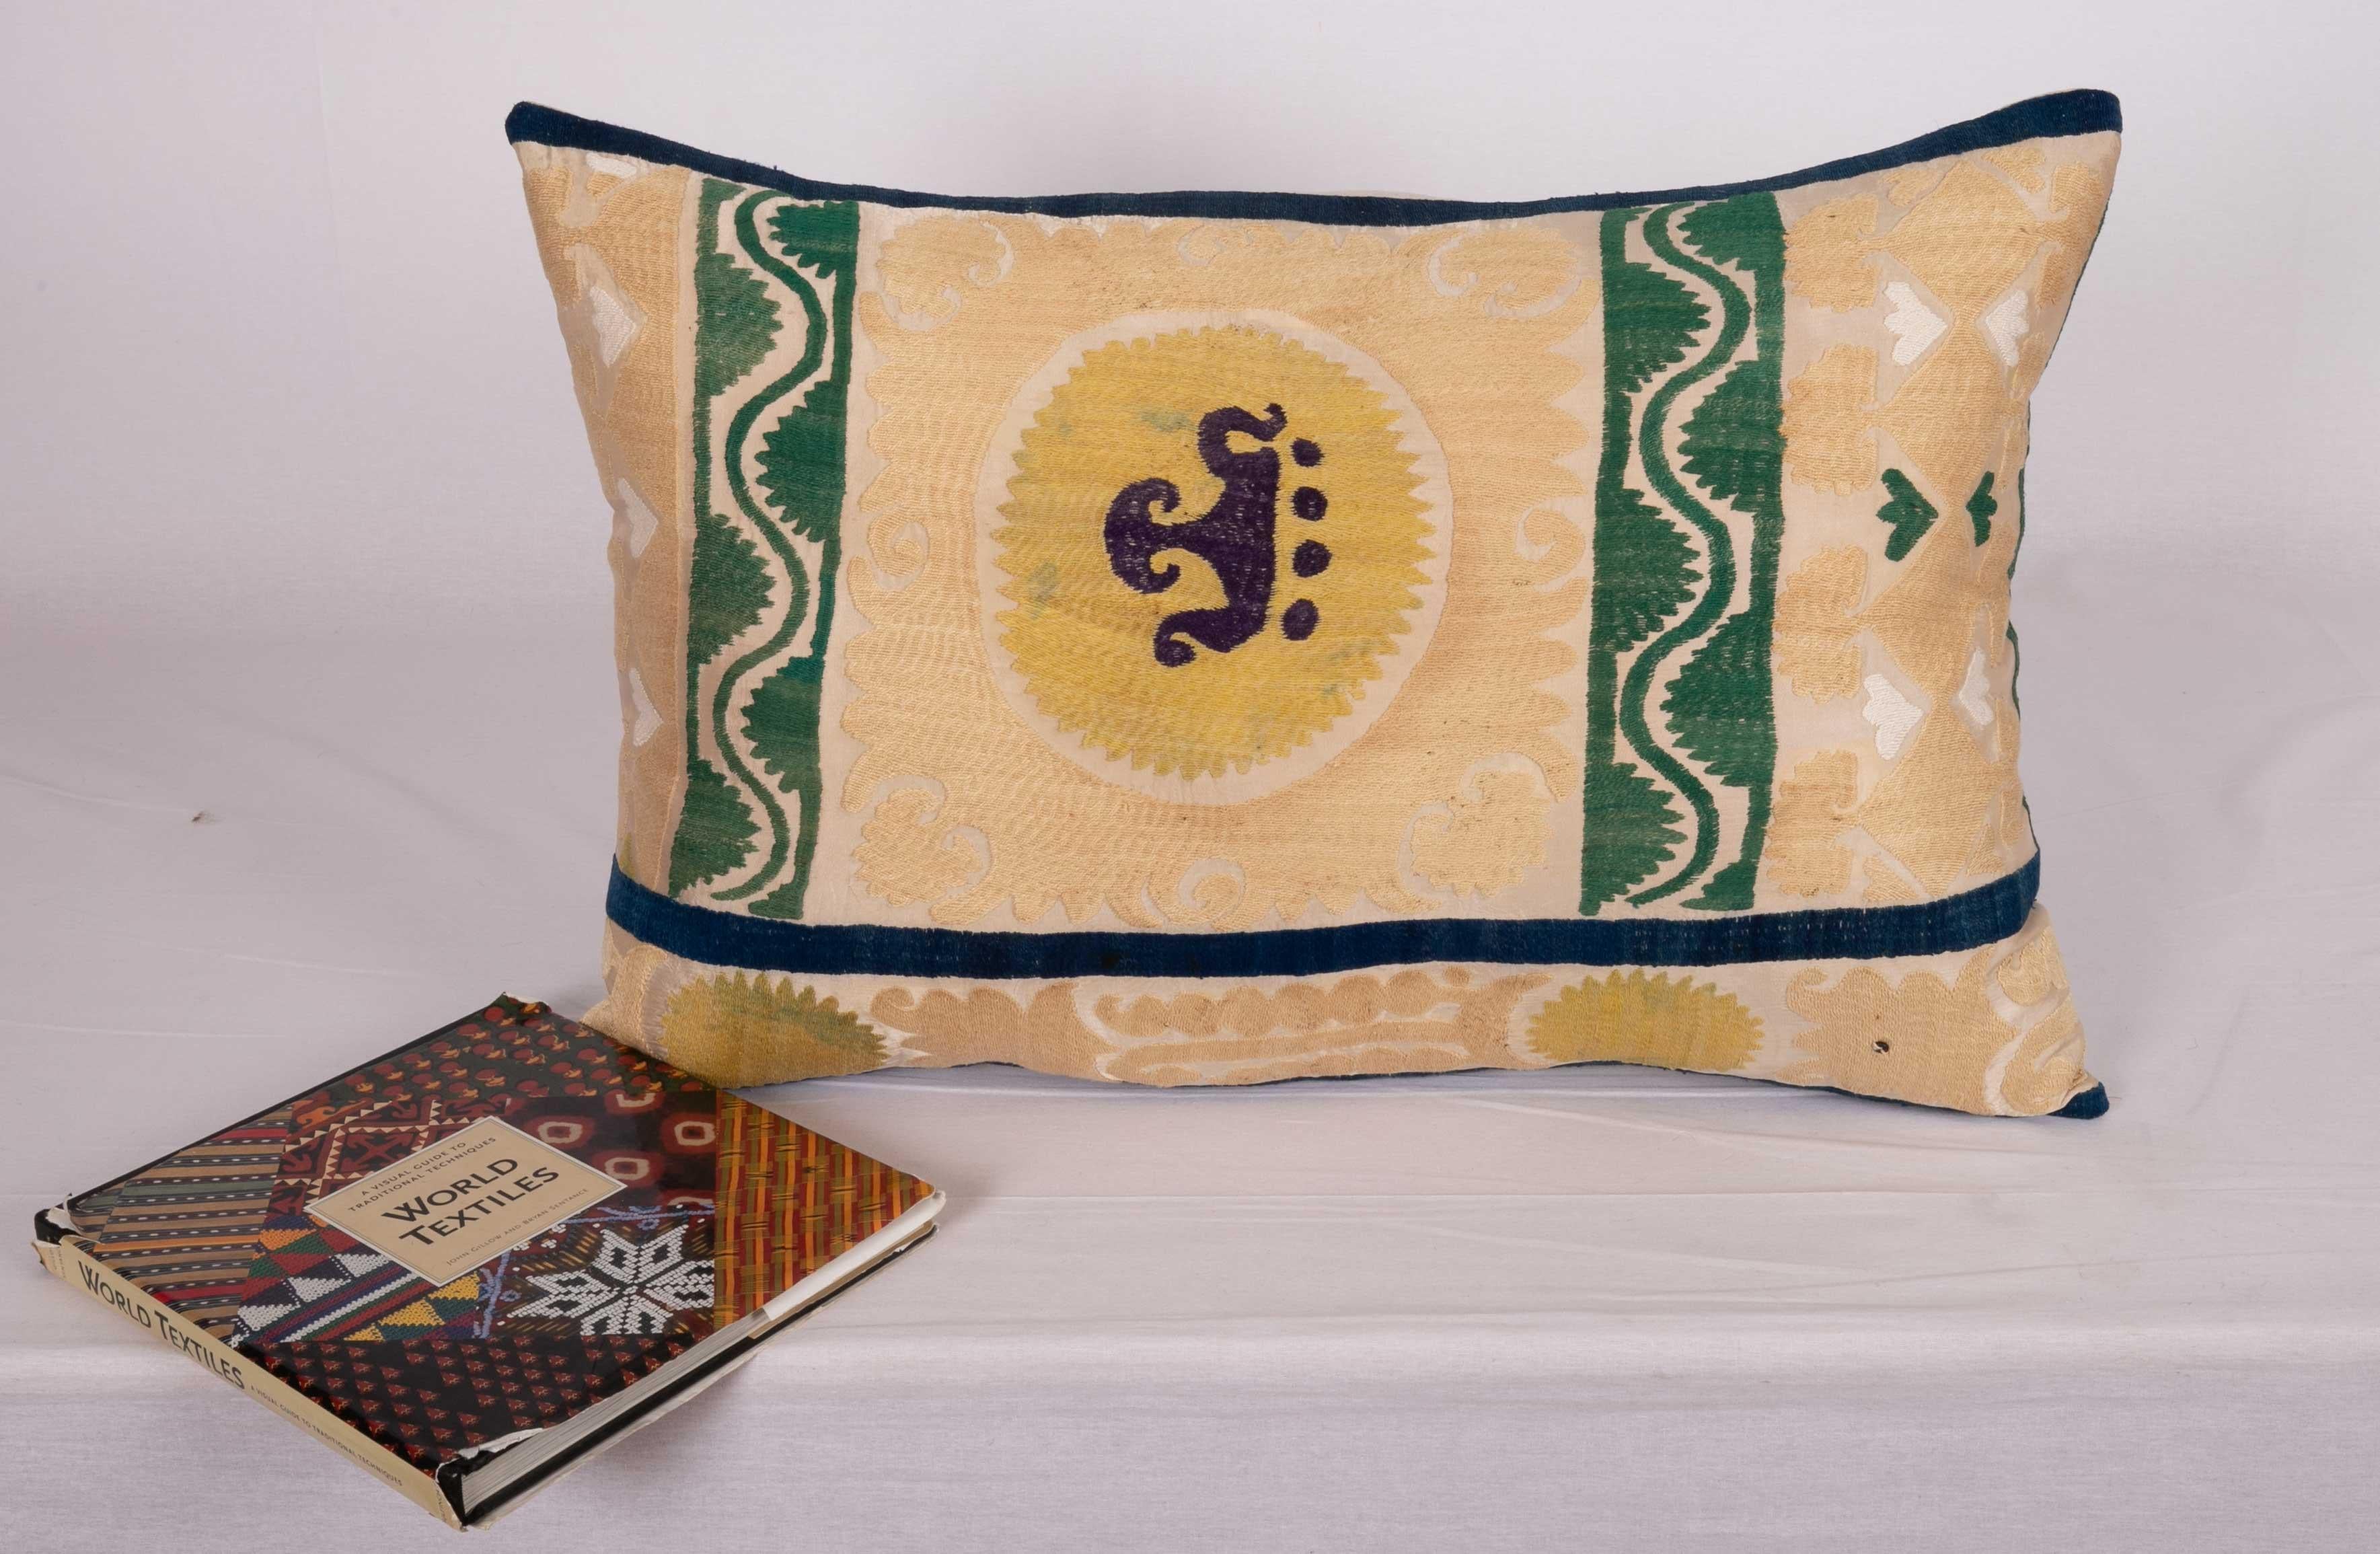 Cotton Suzani Pillow Case, Made from a Mid 20th C. Uzbek Suzani For Sale